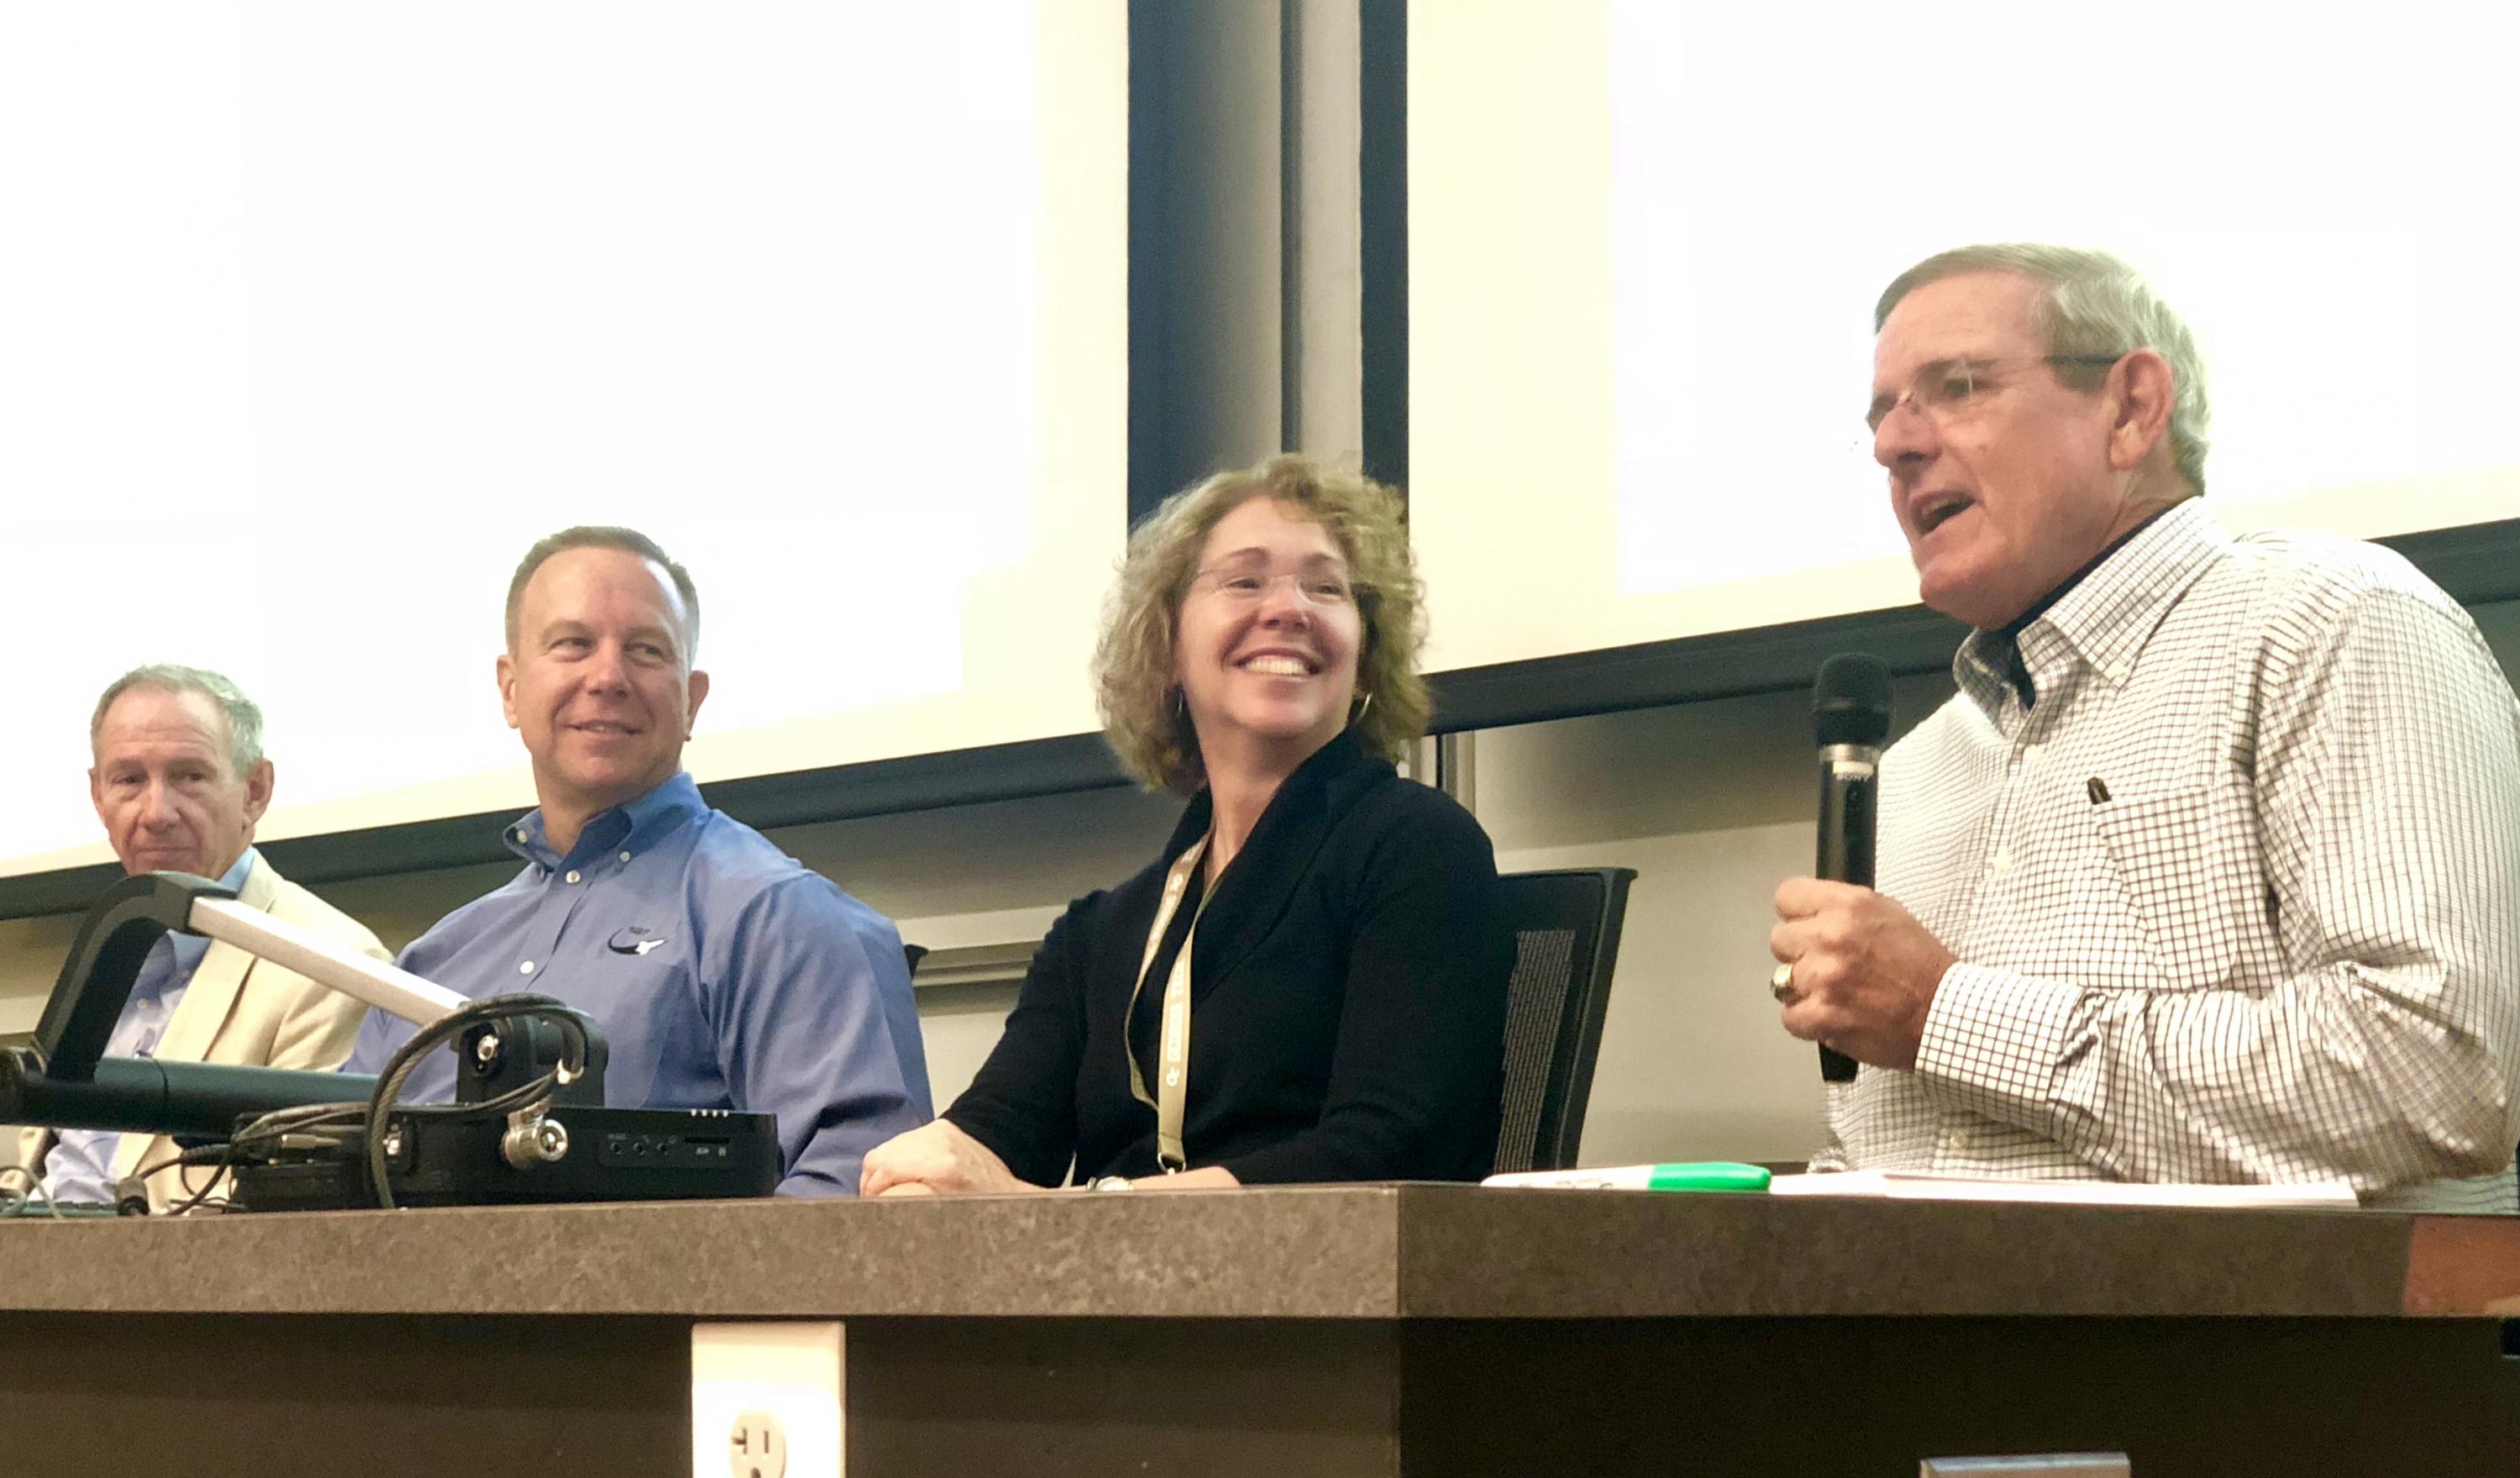 Sandy Magnus, Col. Bill McArthur, and Col. Tim Kopra came back to their alma mater to talk about their experiences with NASA and give advice to the future leaders of the space industry currently working on degrees at Georgia Tech.